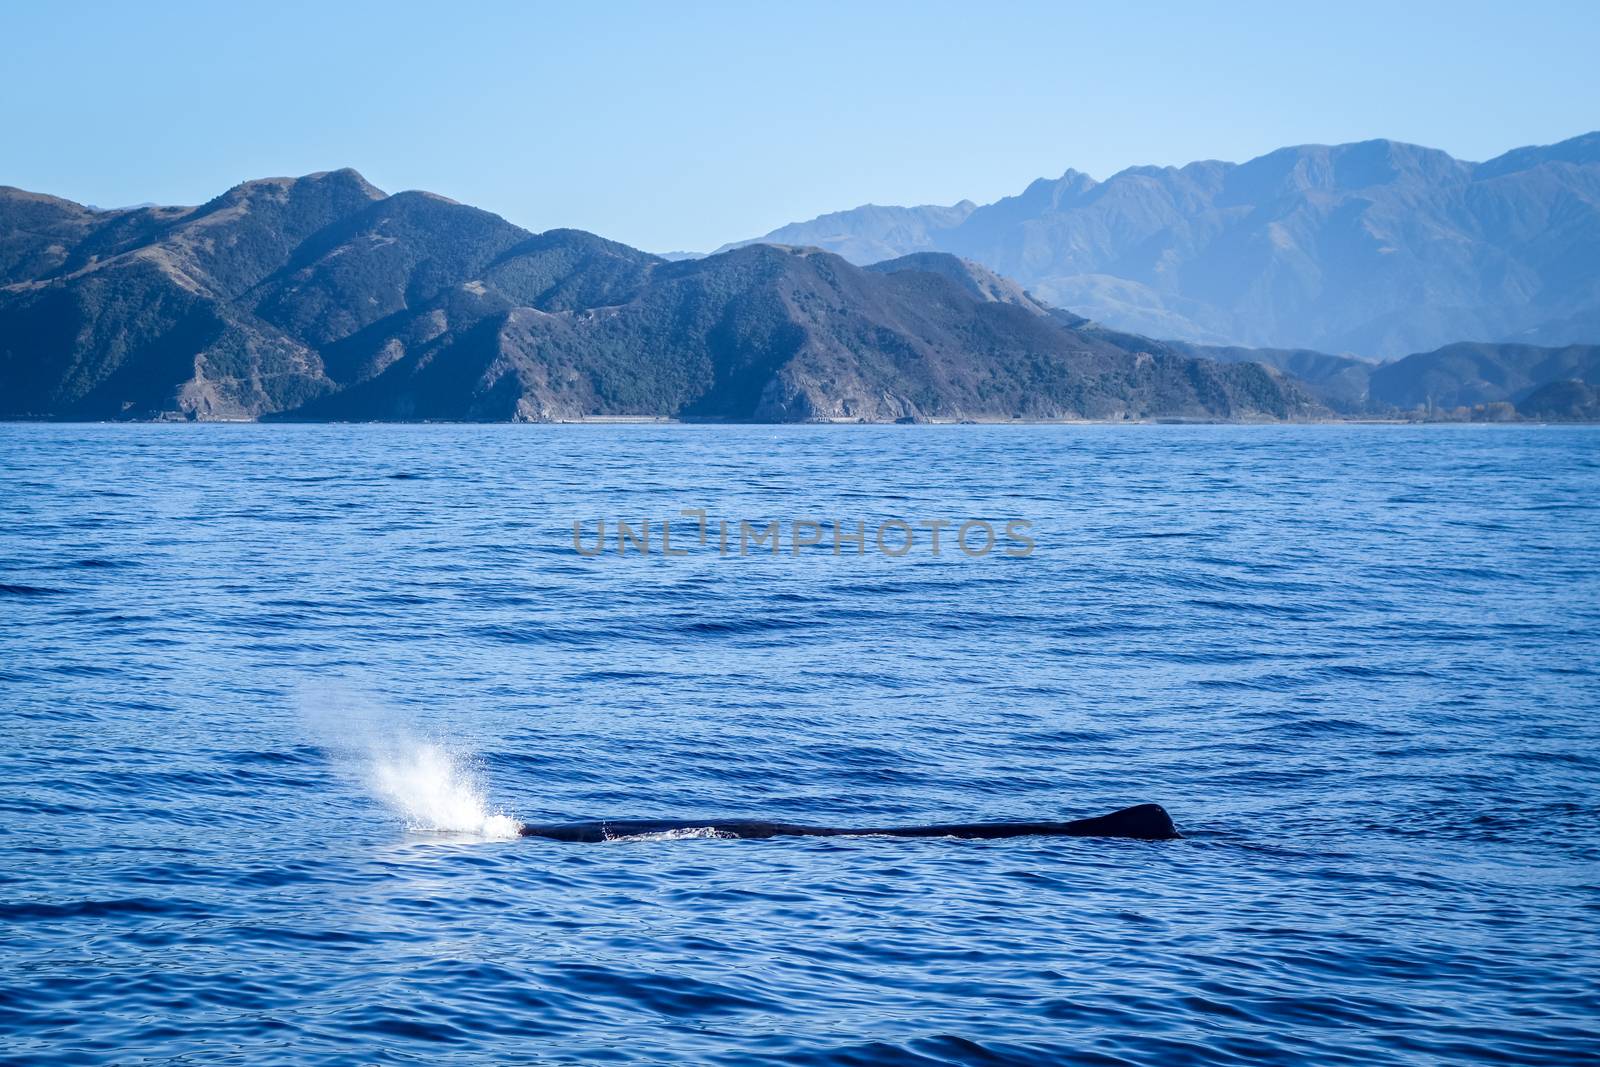 Whale in Kaikoura bay, New Zealand by daboost